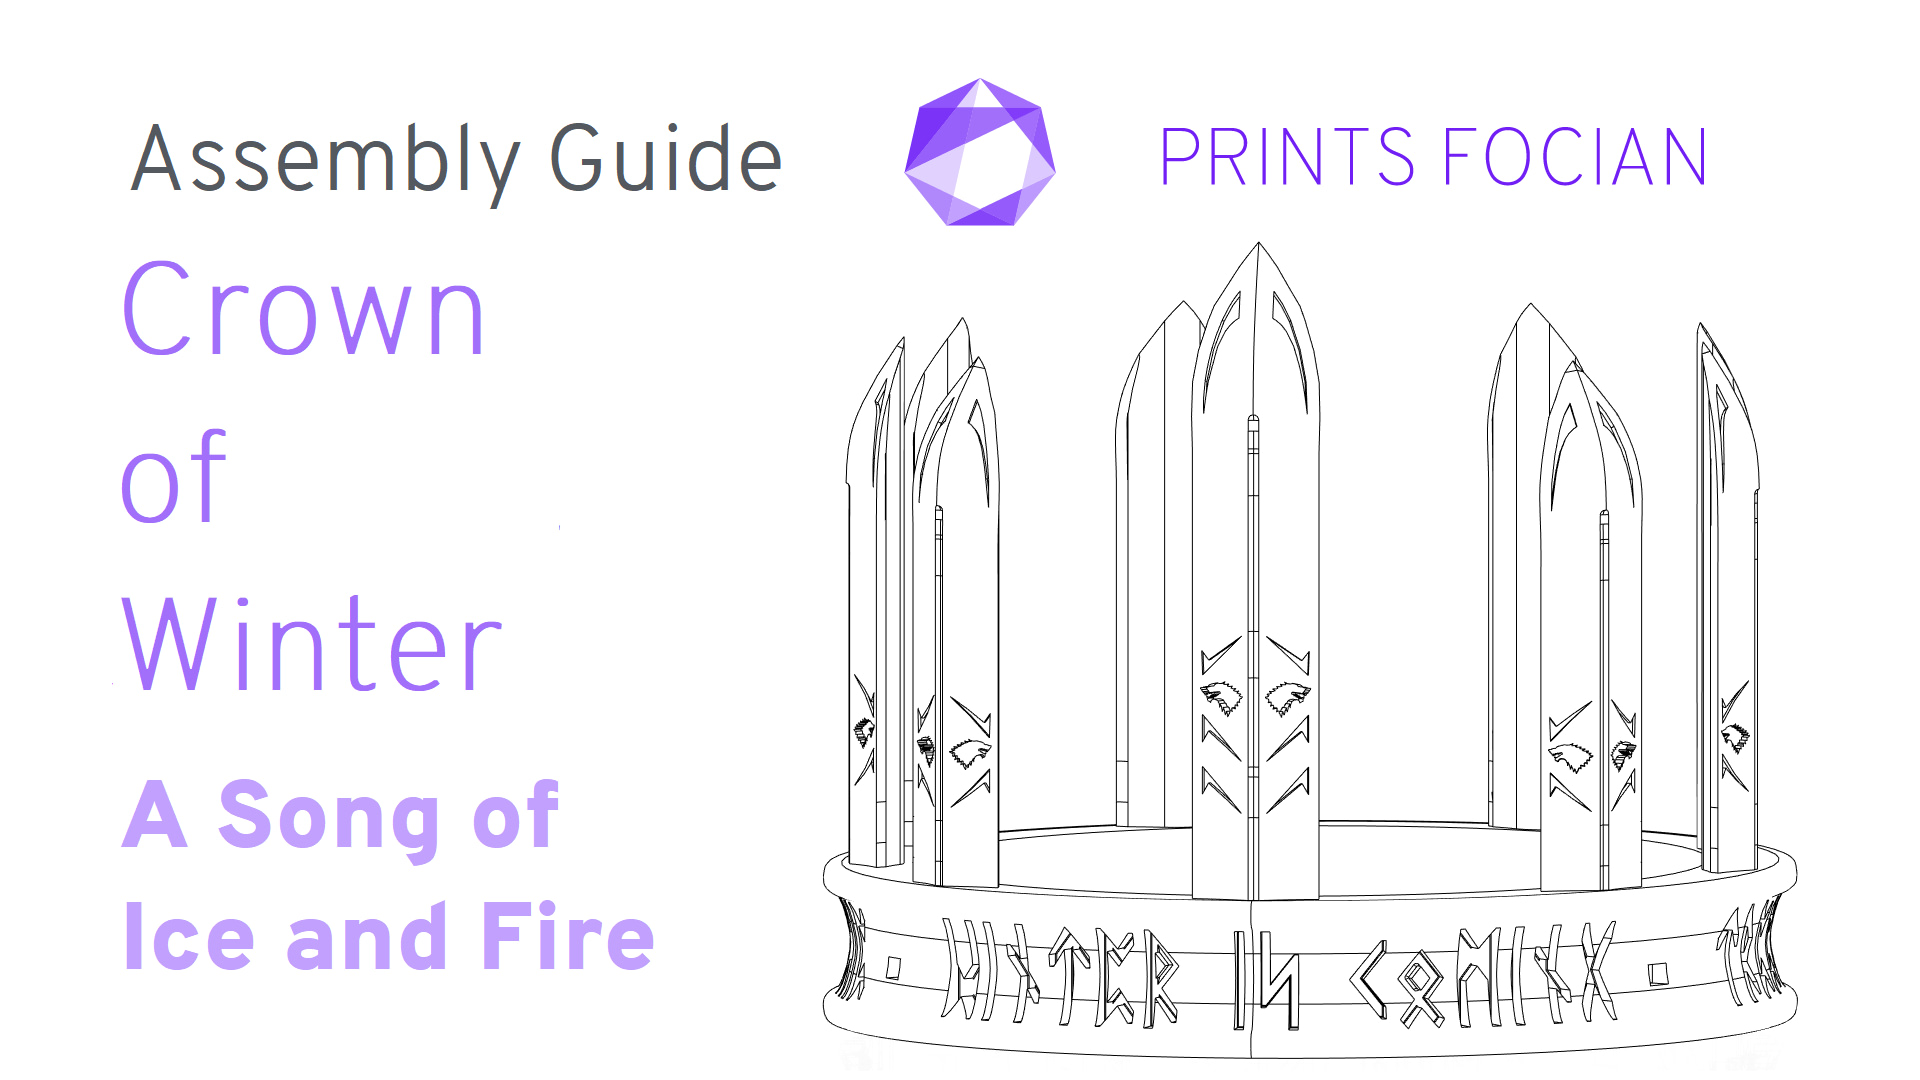 Wireframe image of the Crown of WInter on a white background. Prints Focian Icon top and central. Text: Purple Prints Focian, Crown of Winter, A Song of Ice and Fire and dark grey Assembly Guide